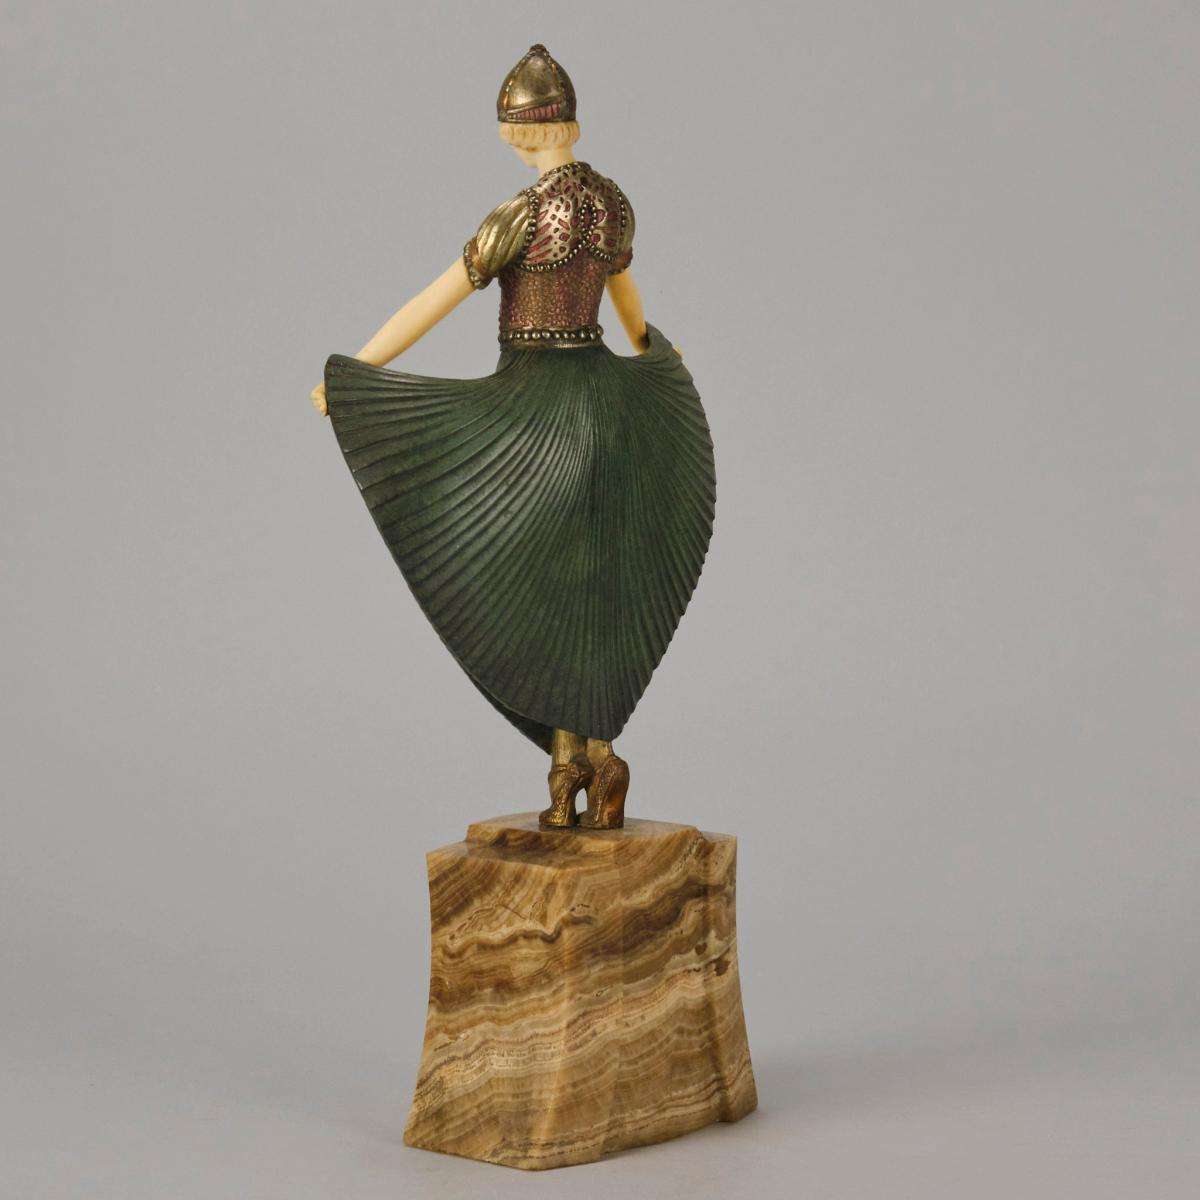 ‘The Actress’ Art Deco Bronze and Ivory by Demeter Chiparus - circa 1920